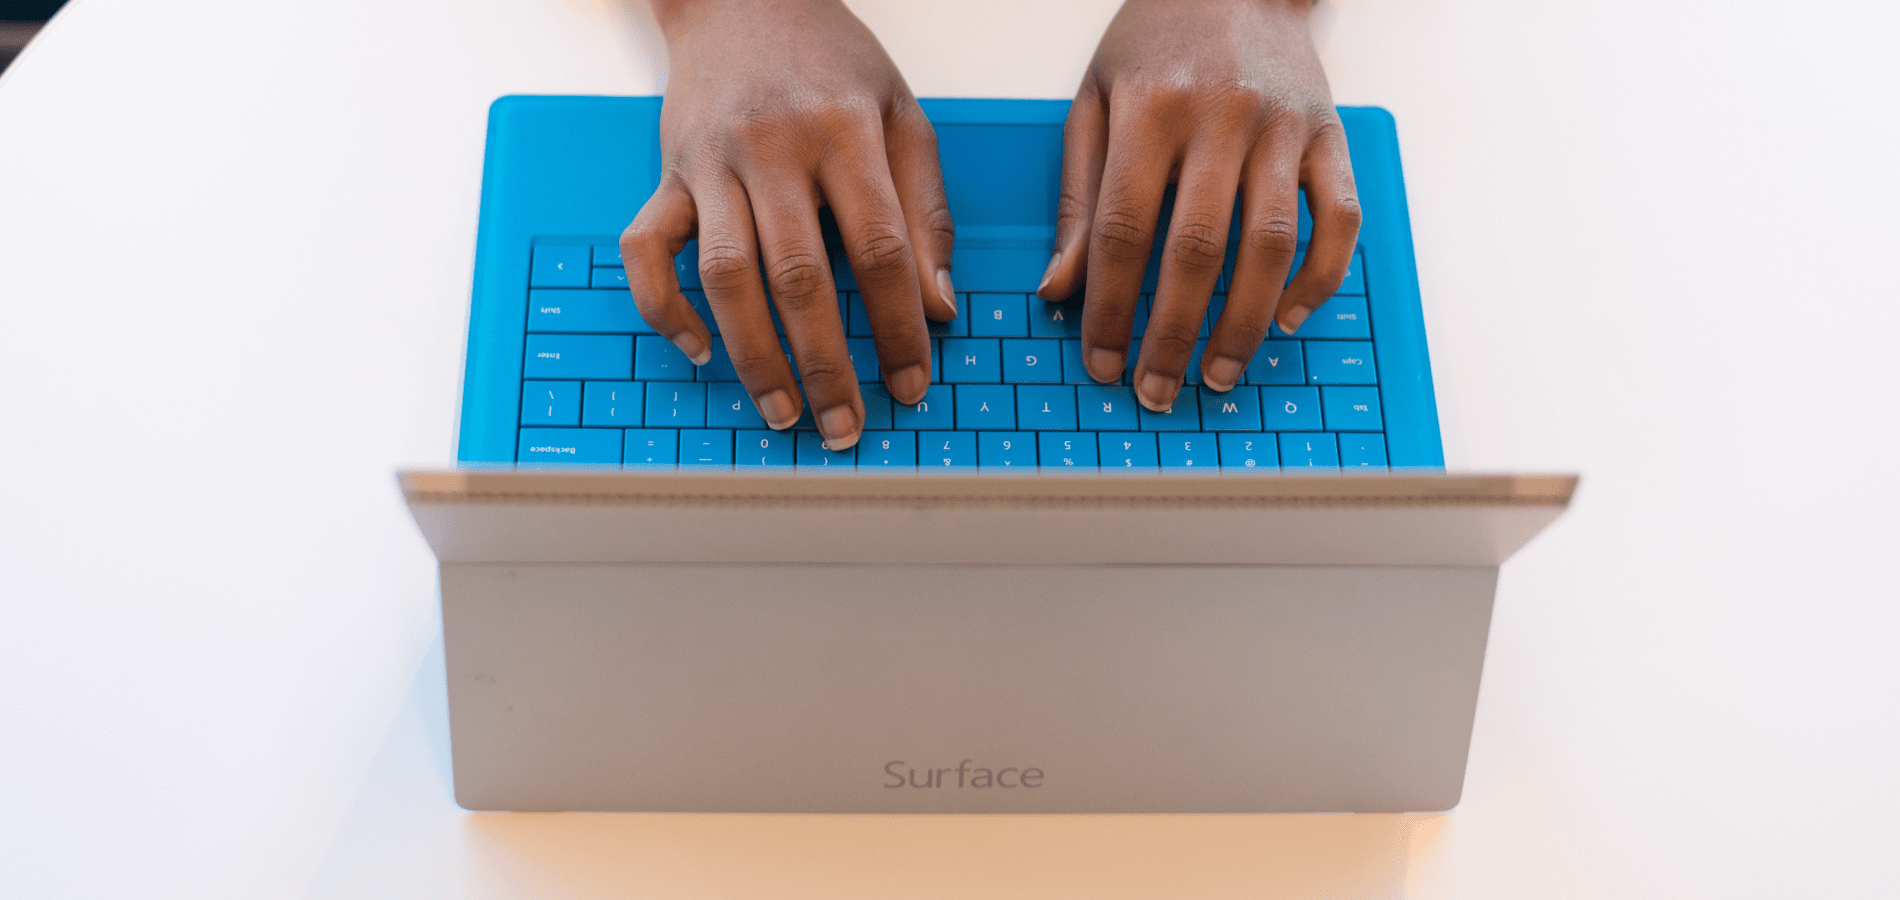 Handing typing on a laptop